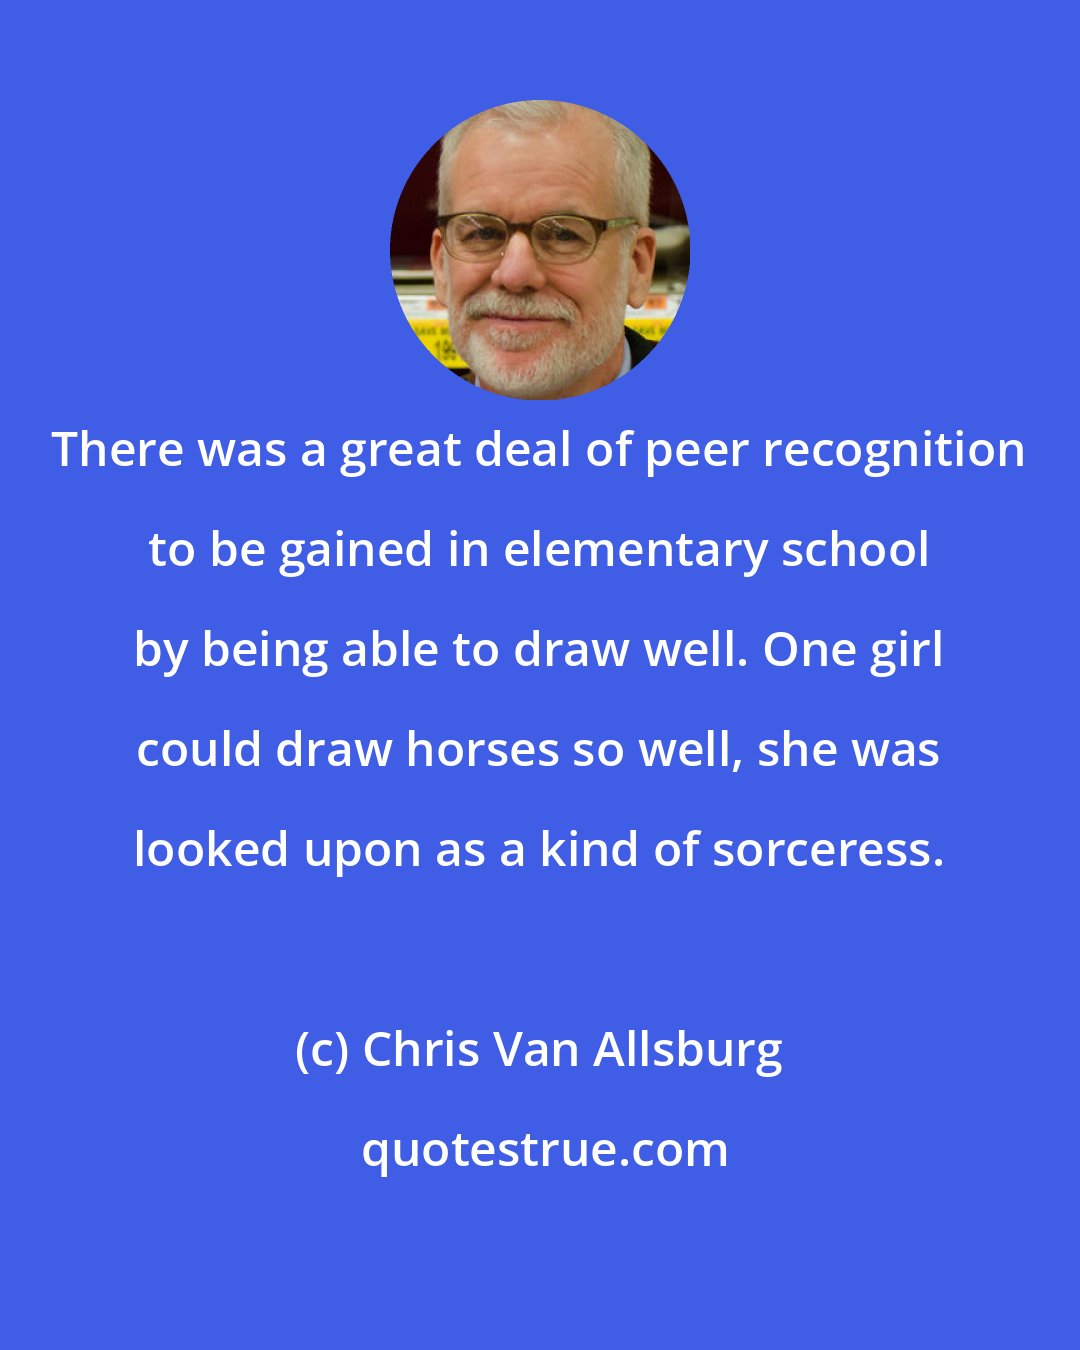 Chris Van Allsburg: There was a great deal of peer recognition to be gained in elementary school by being able to draw well. One girl could draw horses so well, she was looked upon as a kind of sorceress.